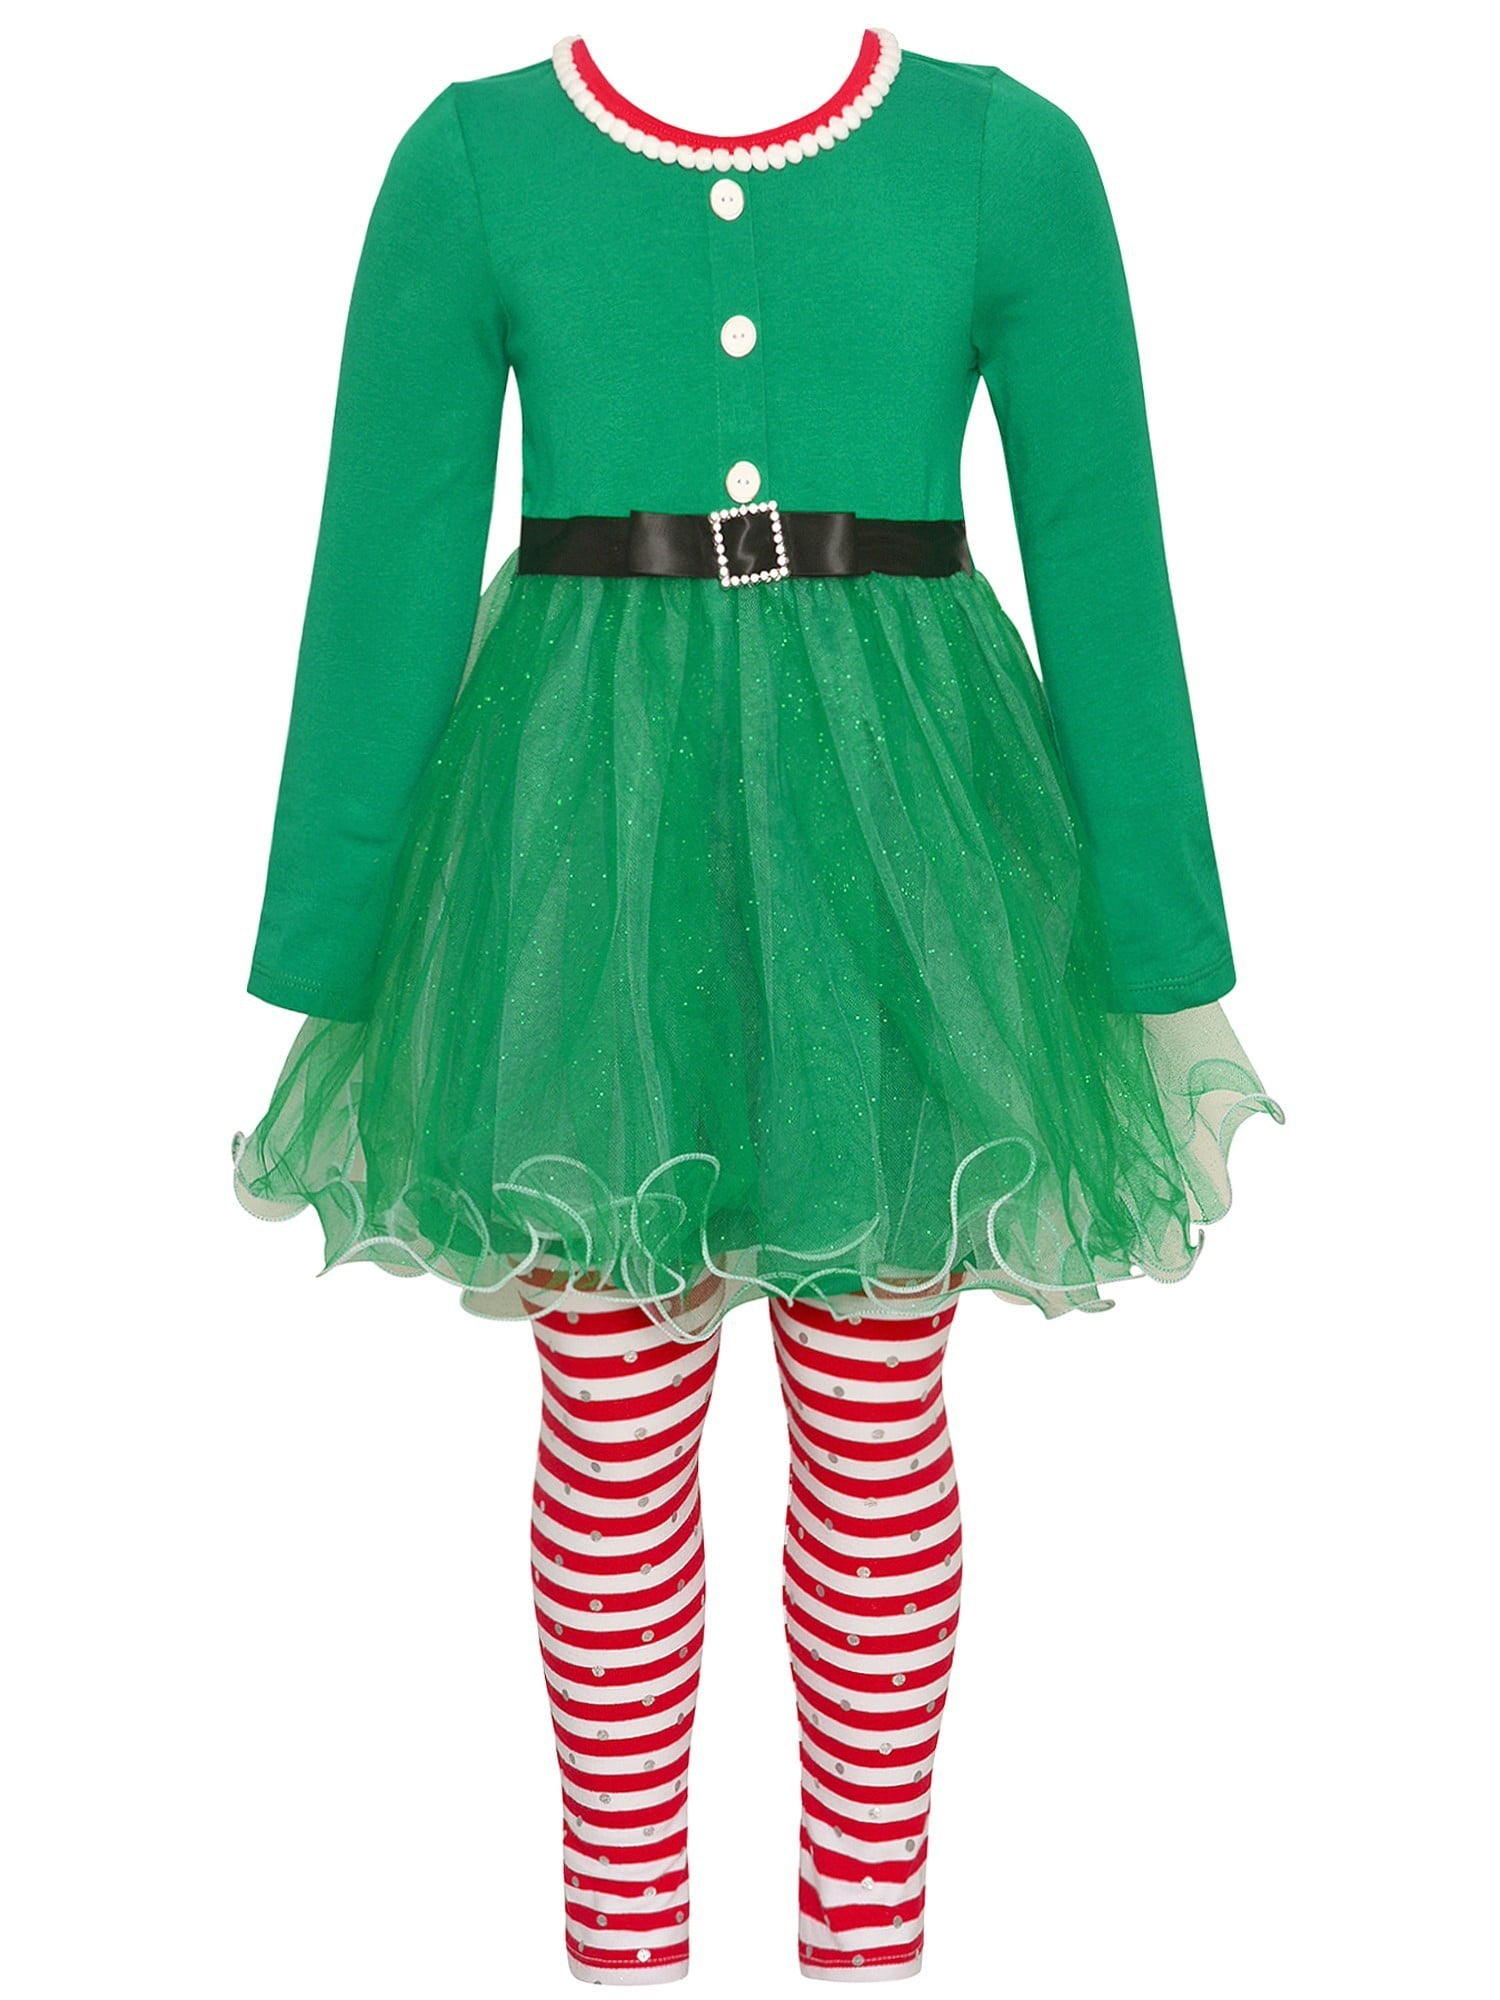 girls elf outfit